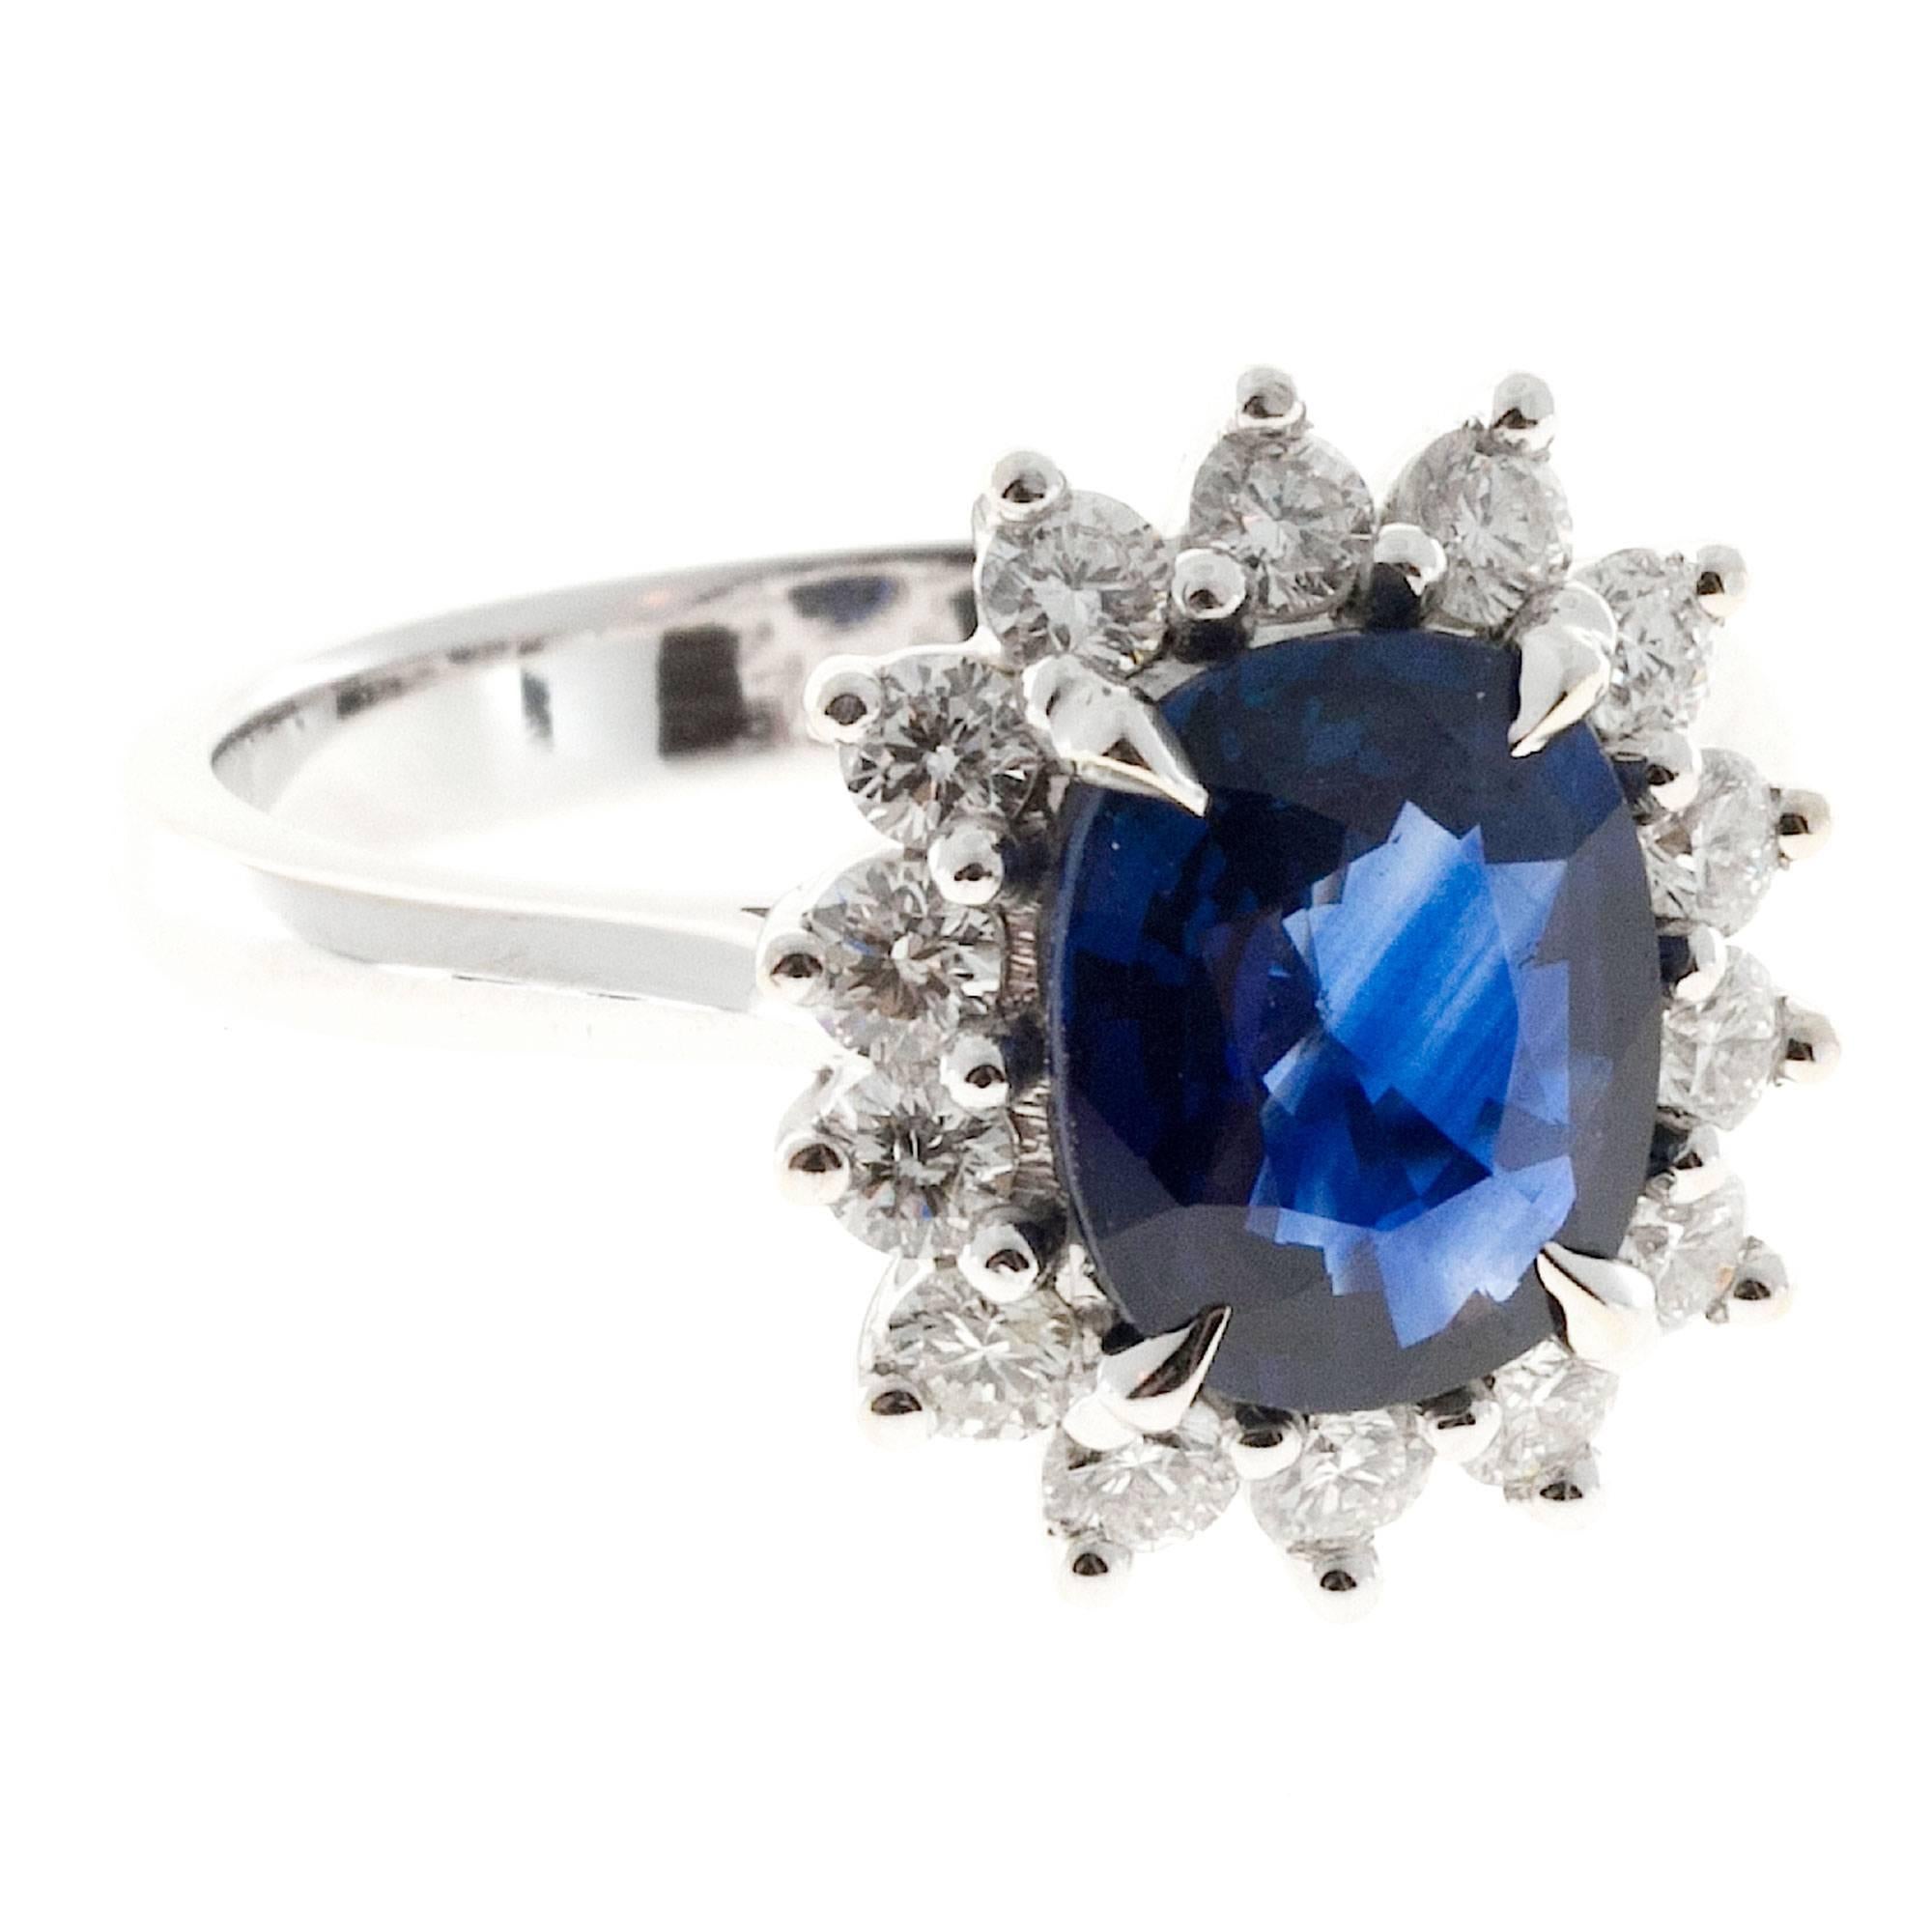 Bright Oval Royal blue sapphire with diamond halo crown. GIA certified simple heat only. Handmade white gold setting. Circa 1950

1 oval Royal blue Sapphire, approx. total weight 2.12cts, VS2 - SI1, 9 x 7.30 x 3.55mm, natural corundum simple heat